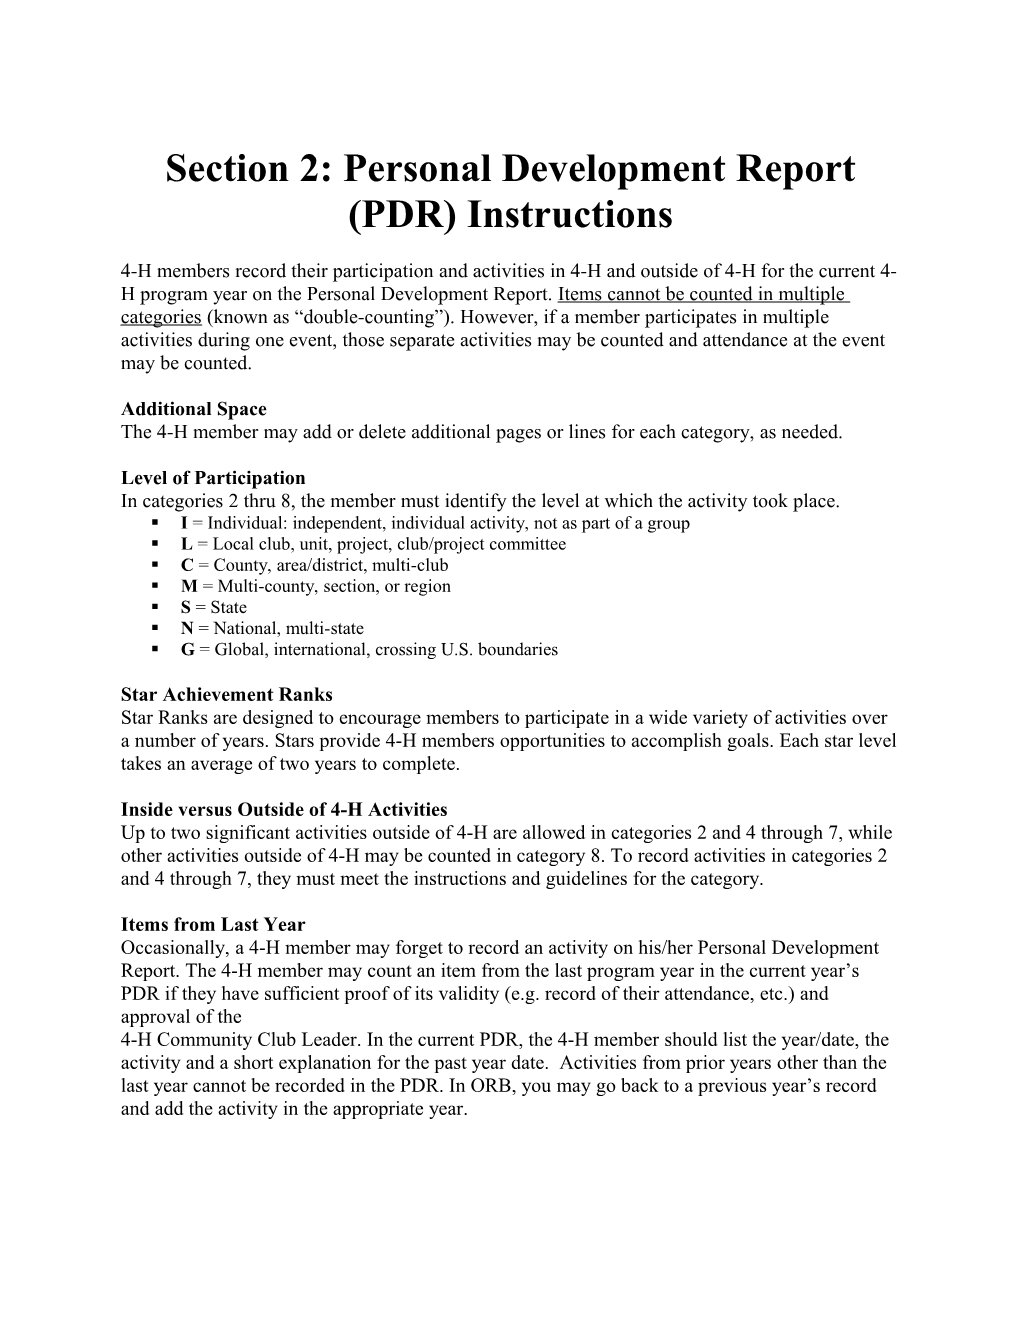 Section 2: Personal Development Report (PDR) Instructions